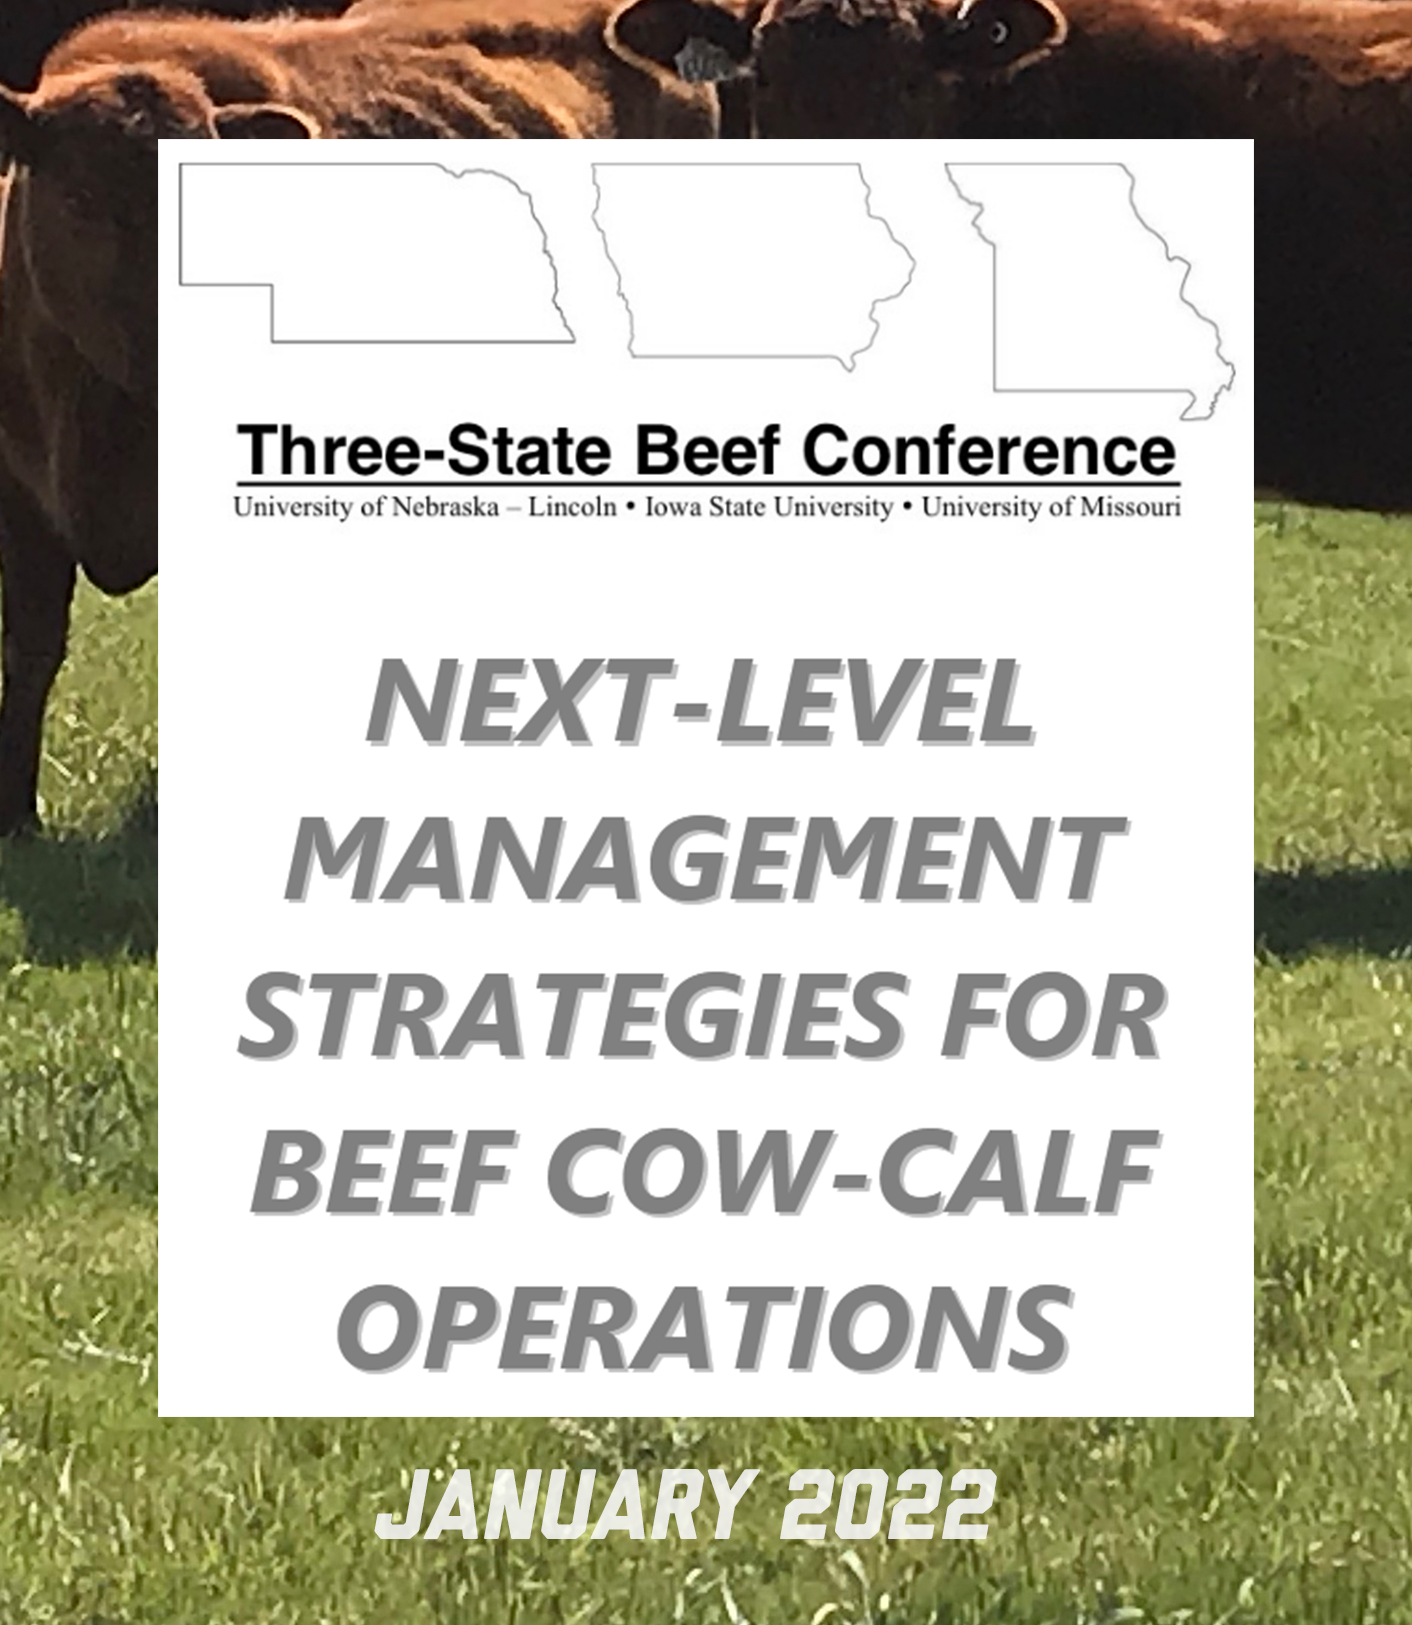 Next-Level Management Strategies for Beef Cow-Calf Operations